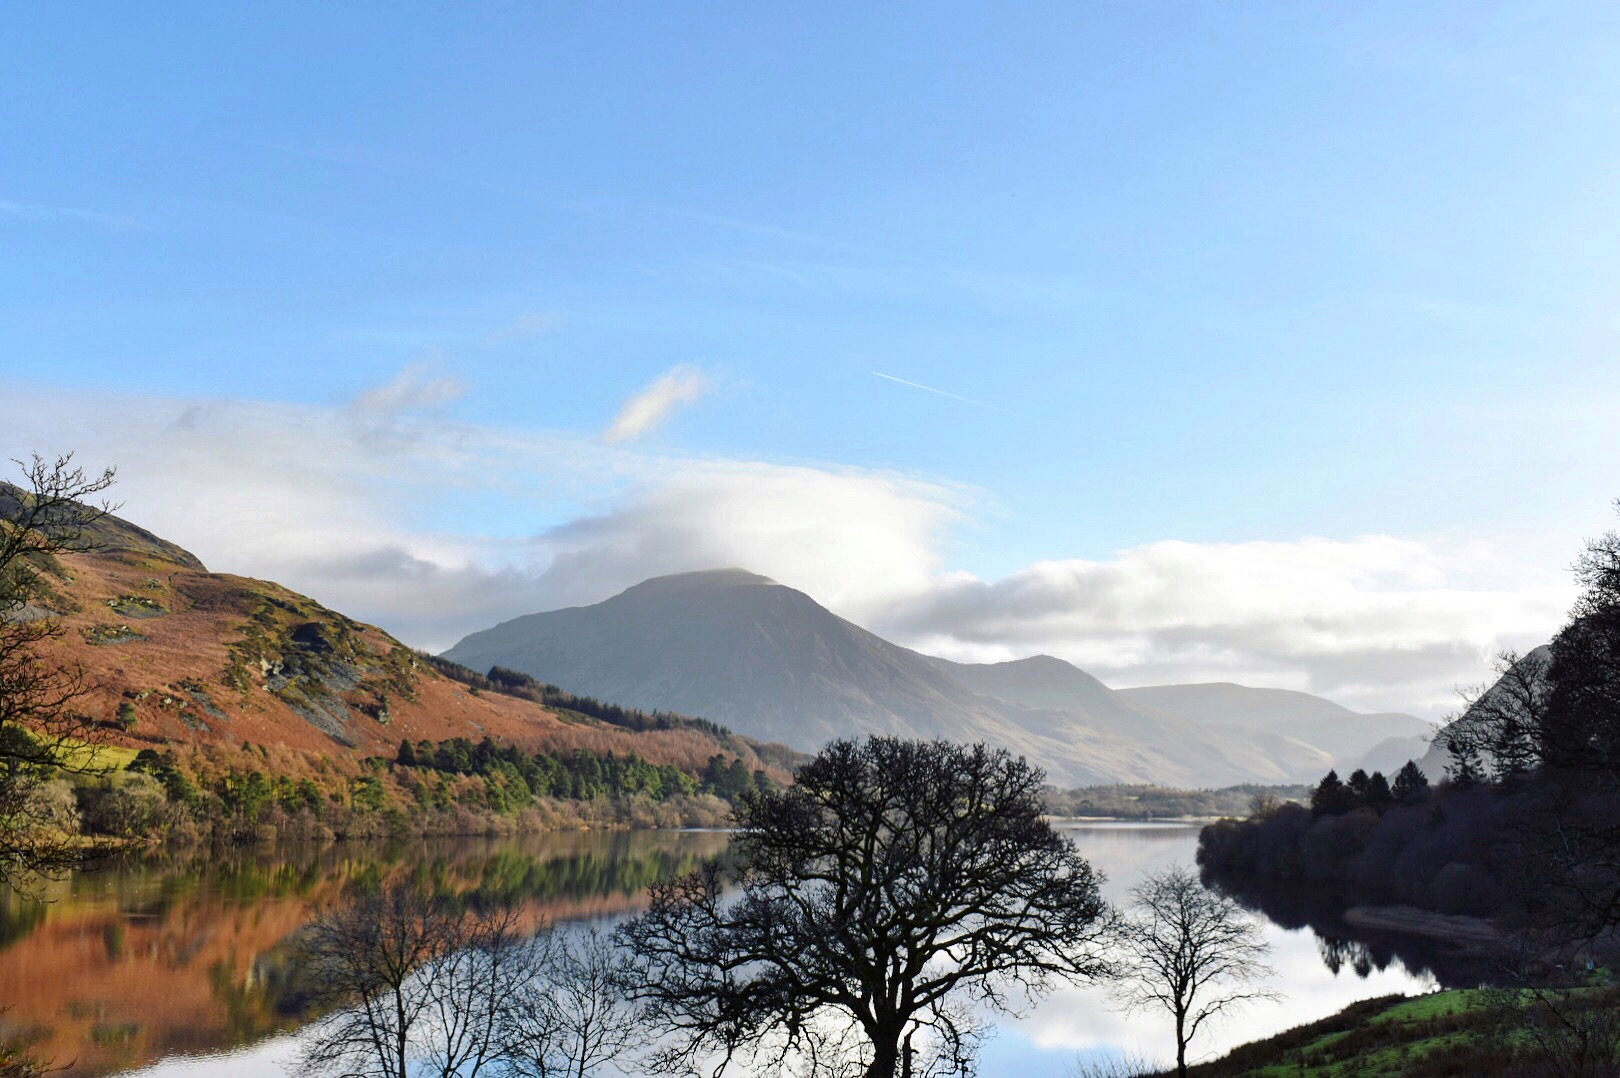 Loweswater Circuit walking route